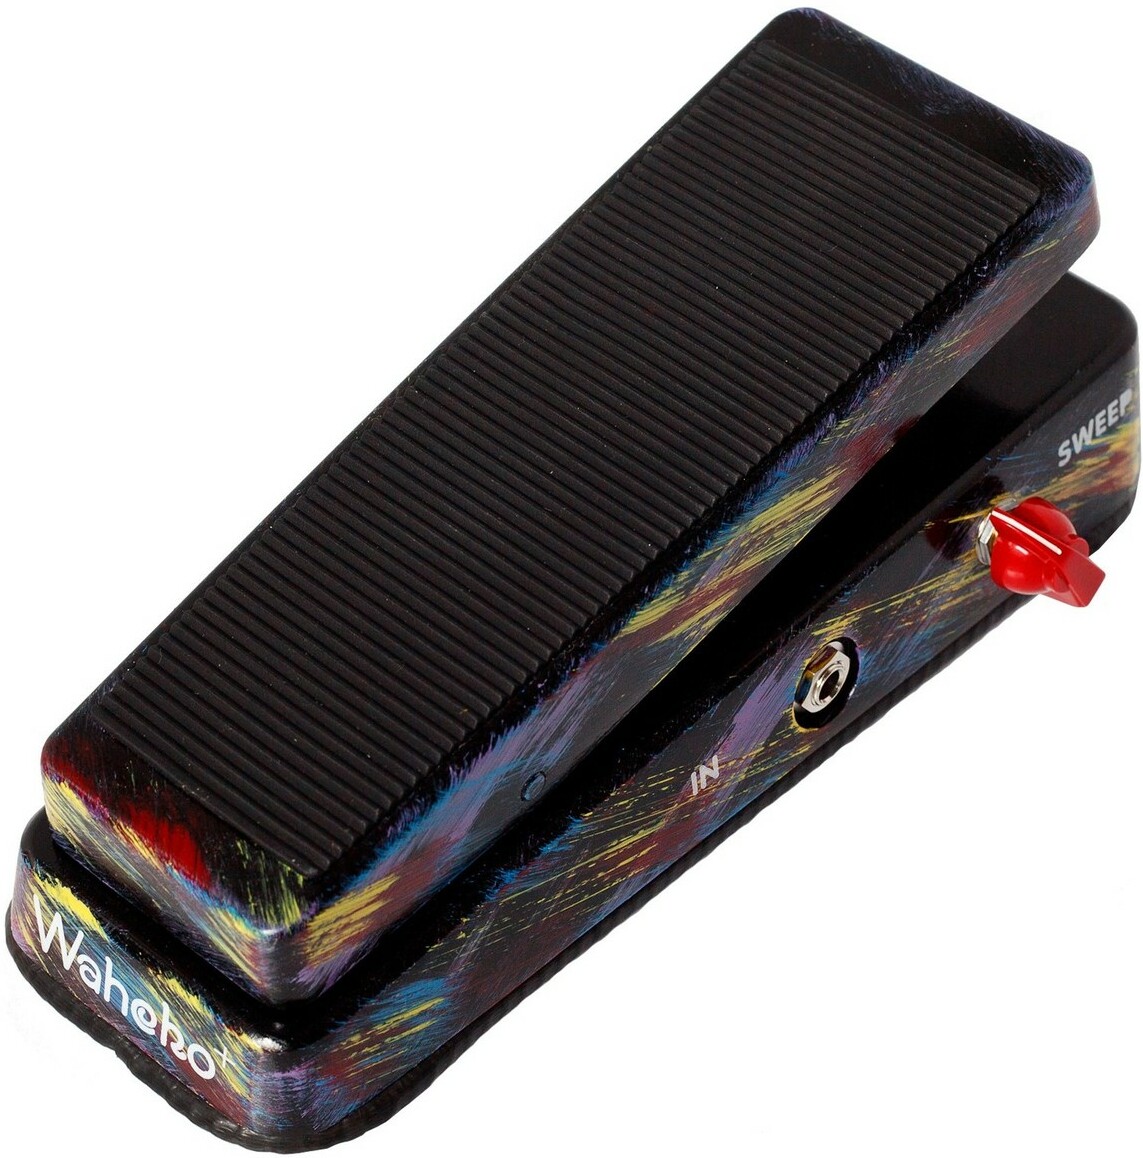 Jam Wahcko Bass - Pedal wah / filtro - Main picture